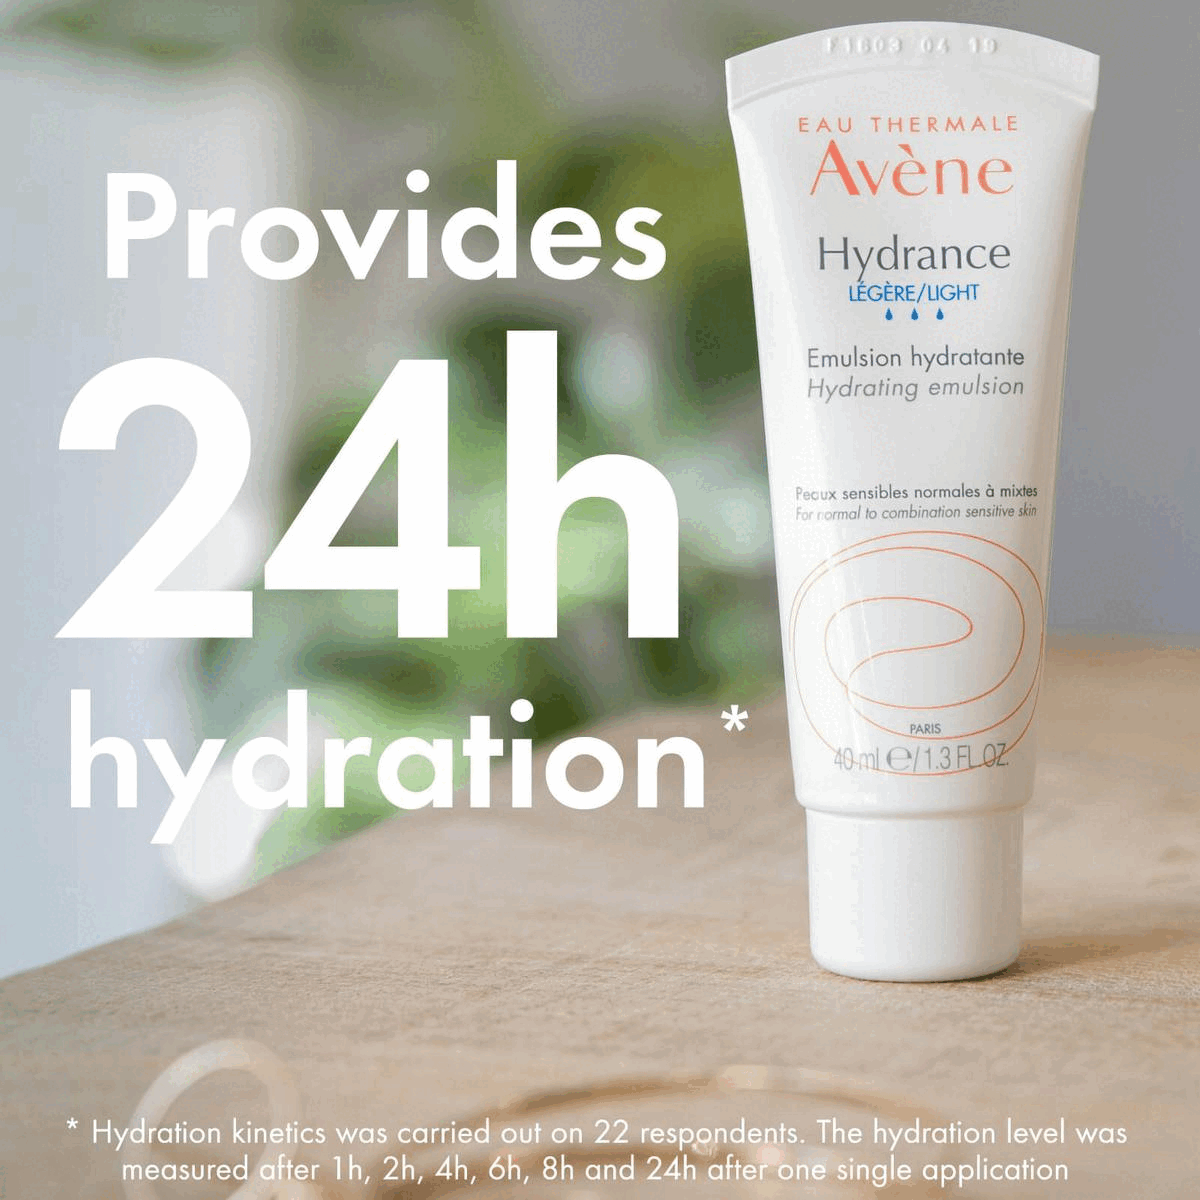 Provides 24h hydration. Discover the routine. Tested on sensitive skin, recommended by dermatologists.